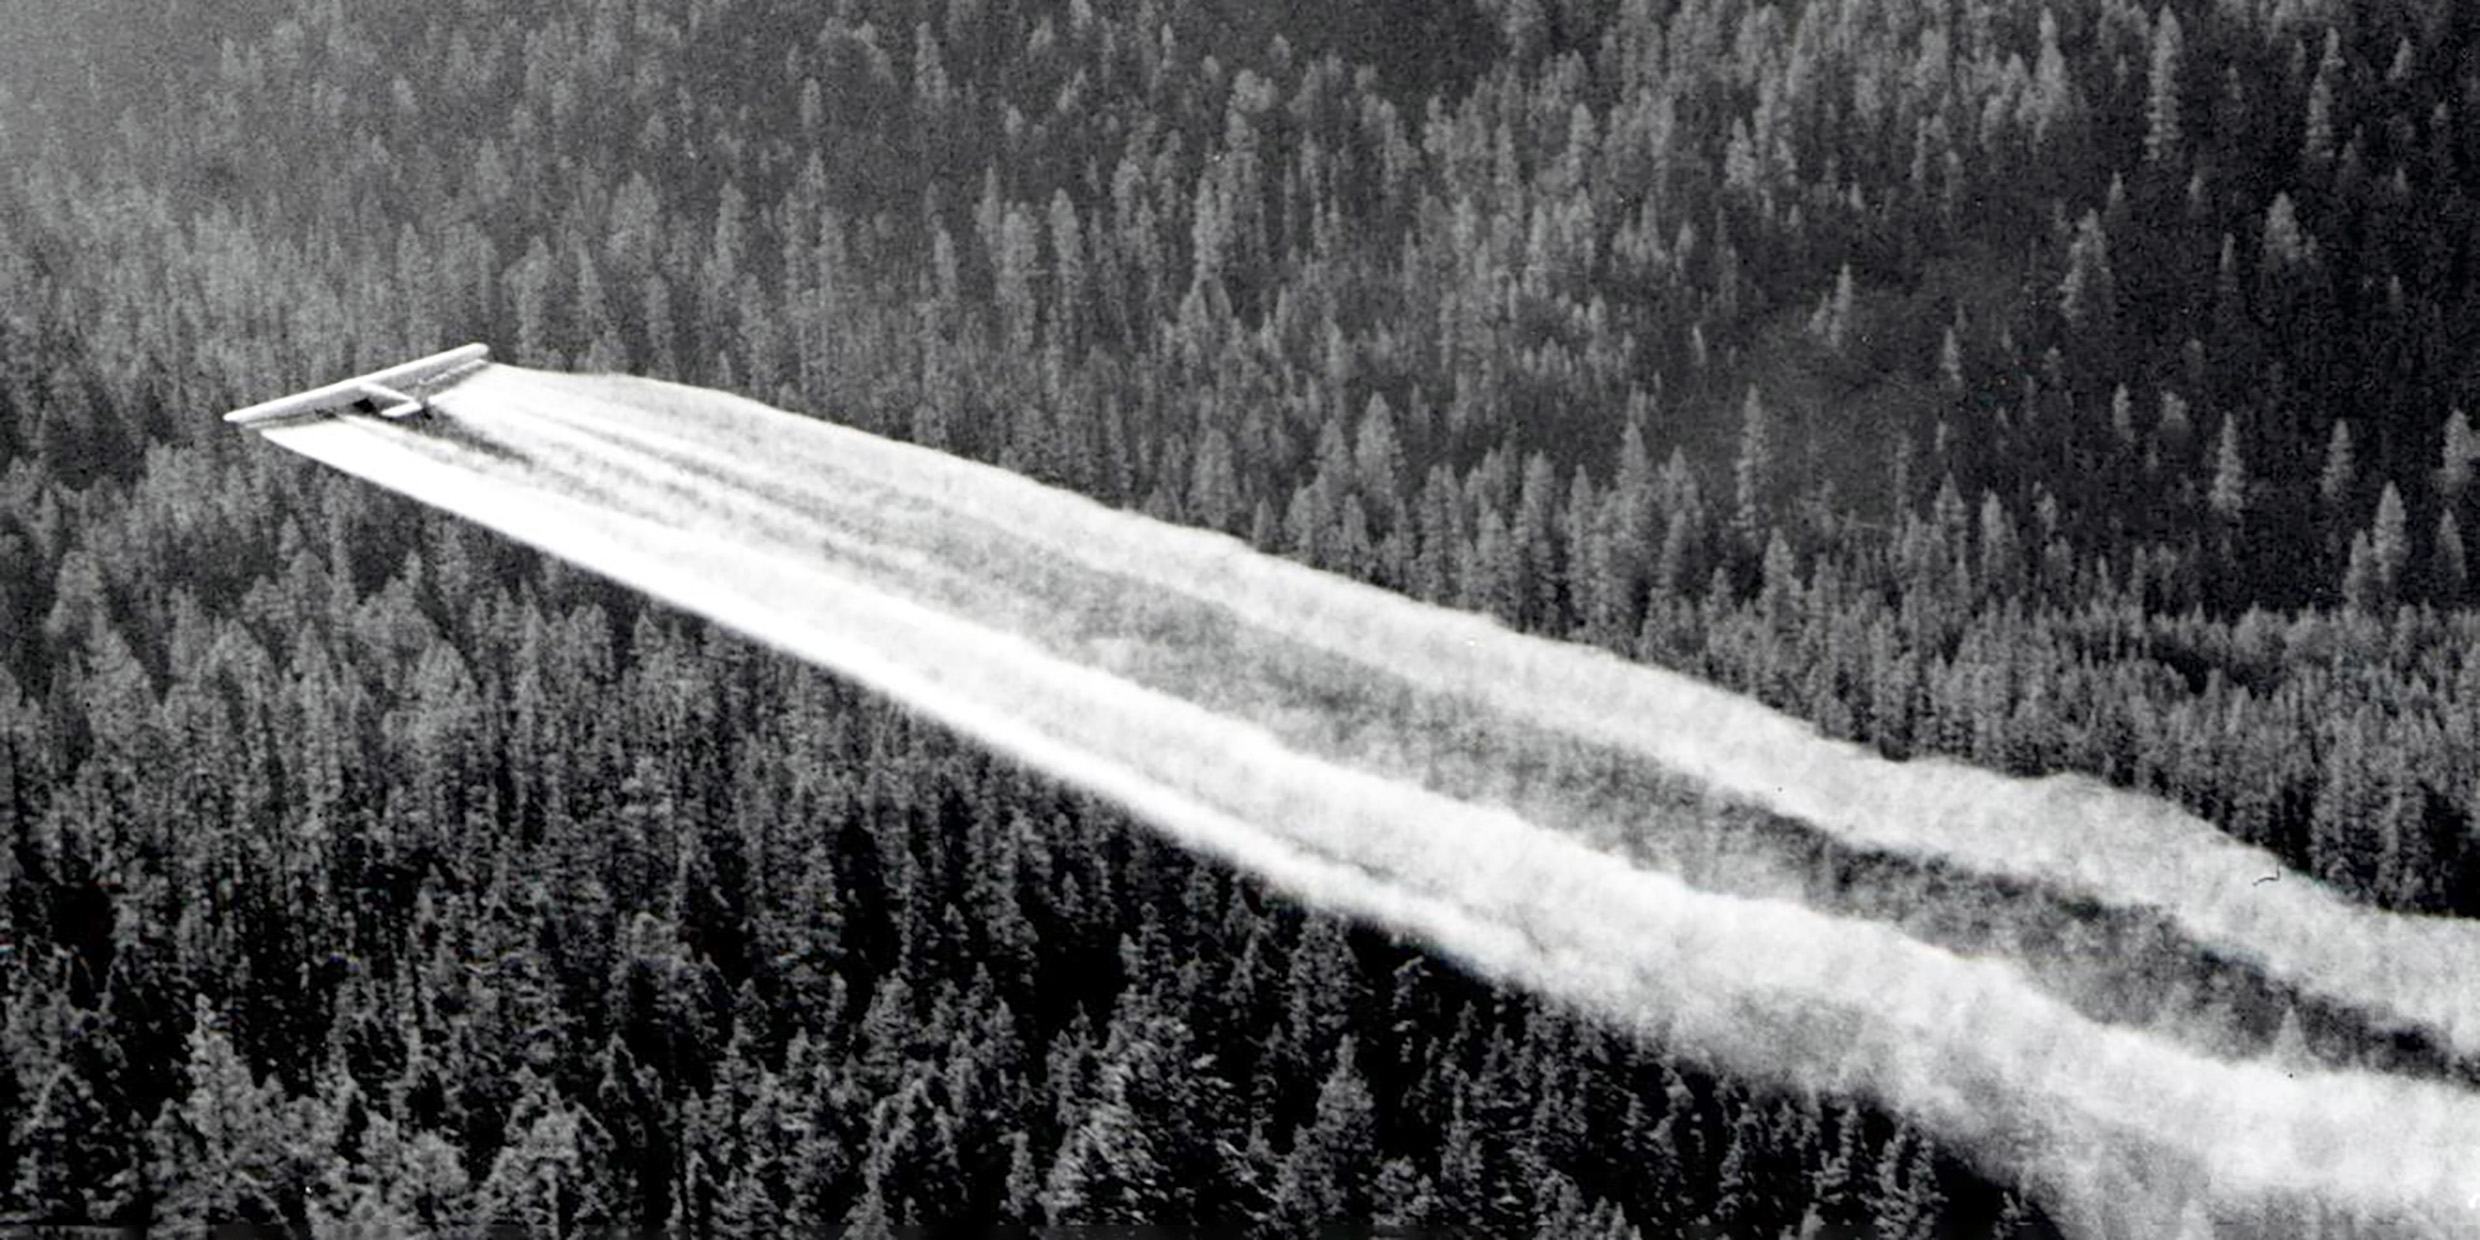 Image of airplane spraying DDT over forest